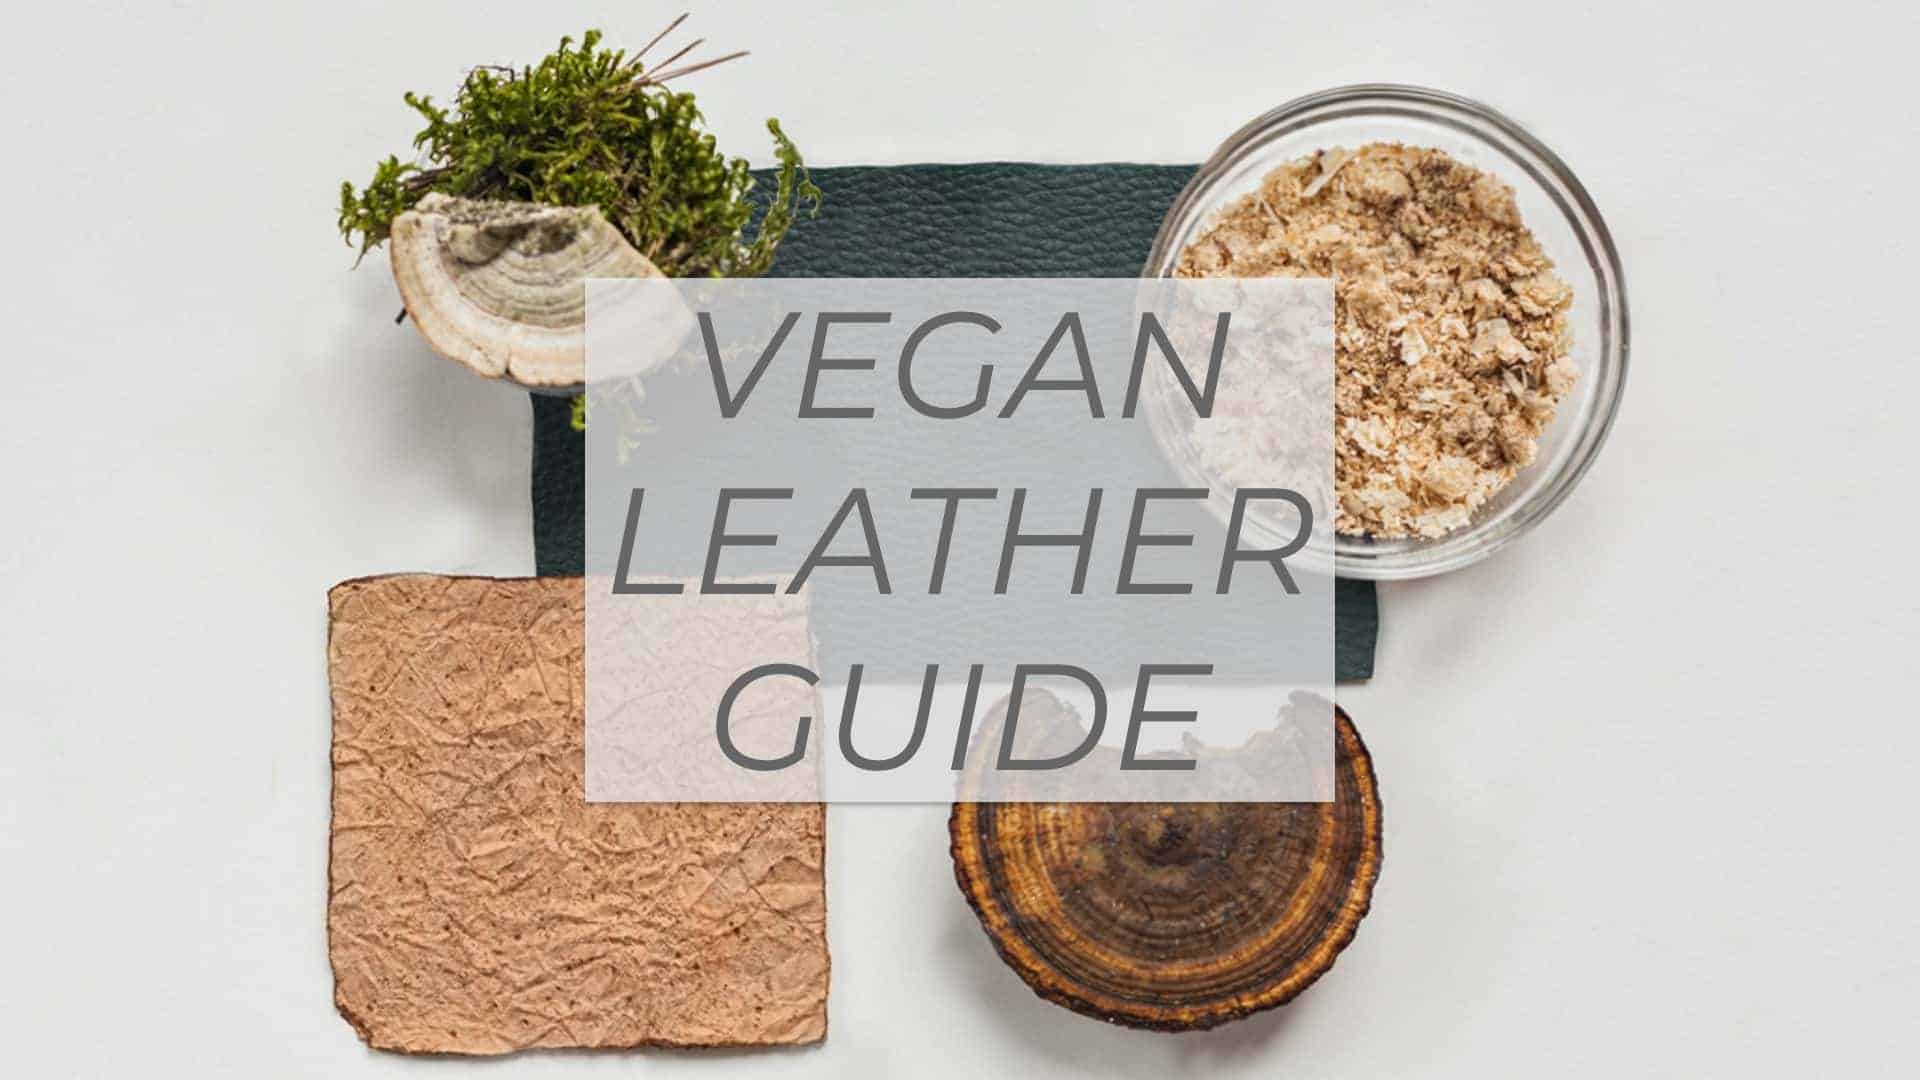 What Is Vegan Leather, Anyway? 4 Types to Know - WSJ